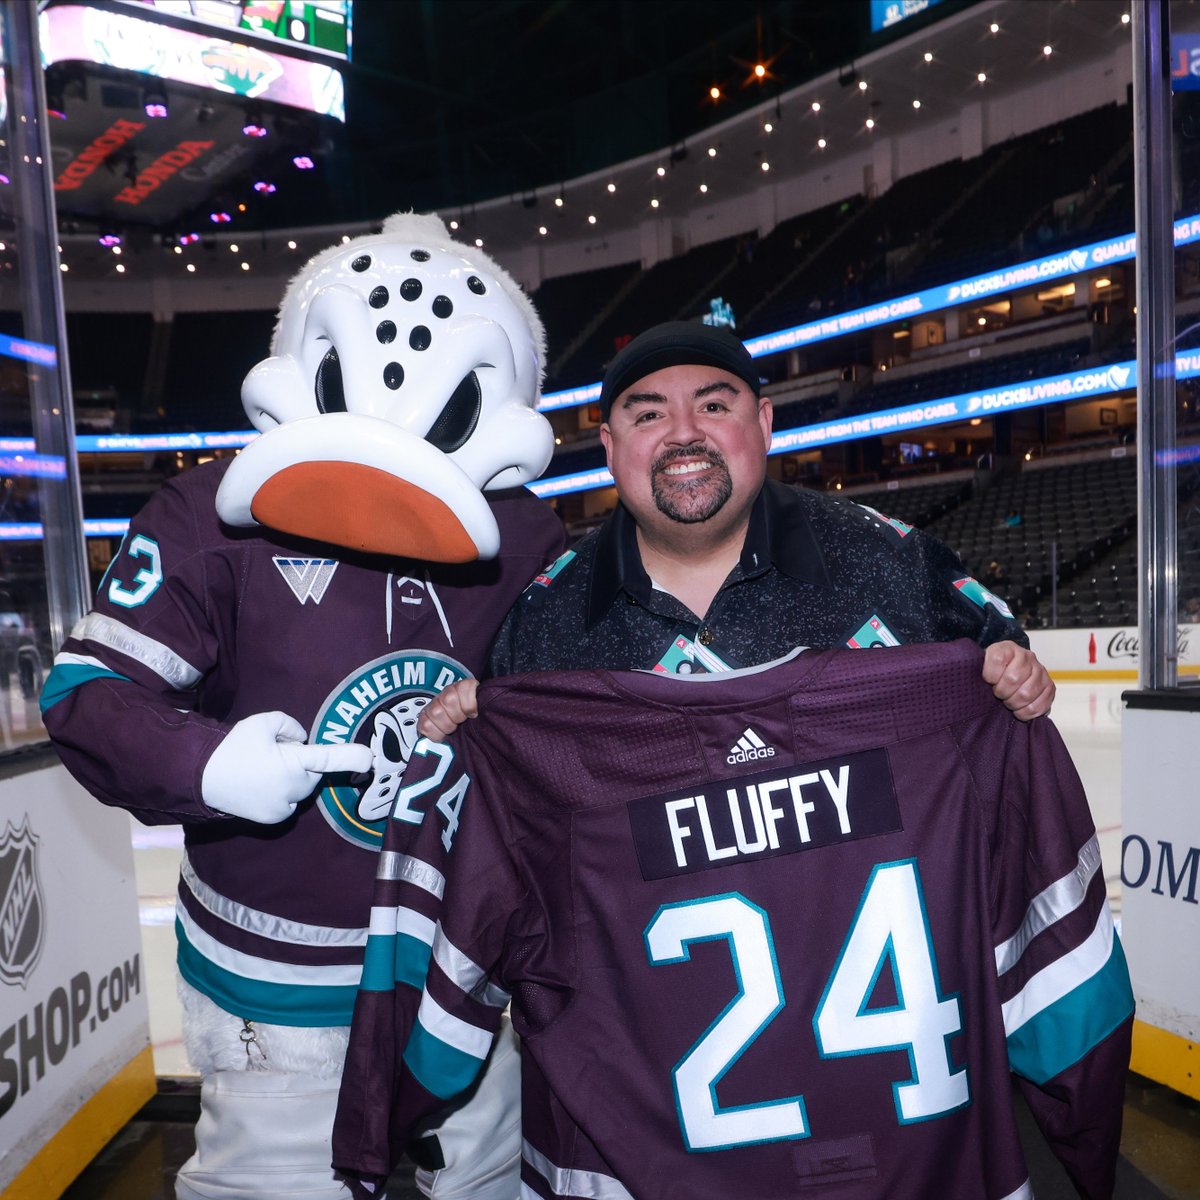 Where the Fluffy fans at?! Drop your seat location and our man @fluffyguy may just drop by with a surprise during the game. He will be bringing the laughs at @HondaCenter on April 19th for his Don't Worry Be Fluffy Tour.